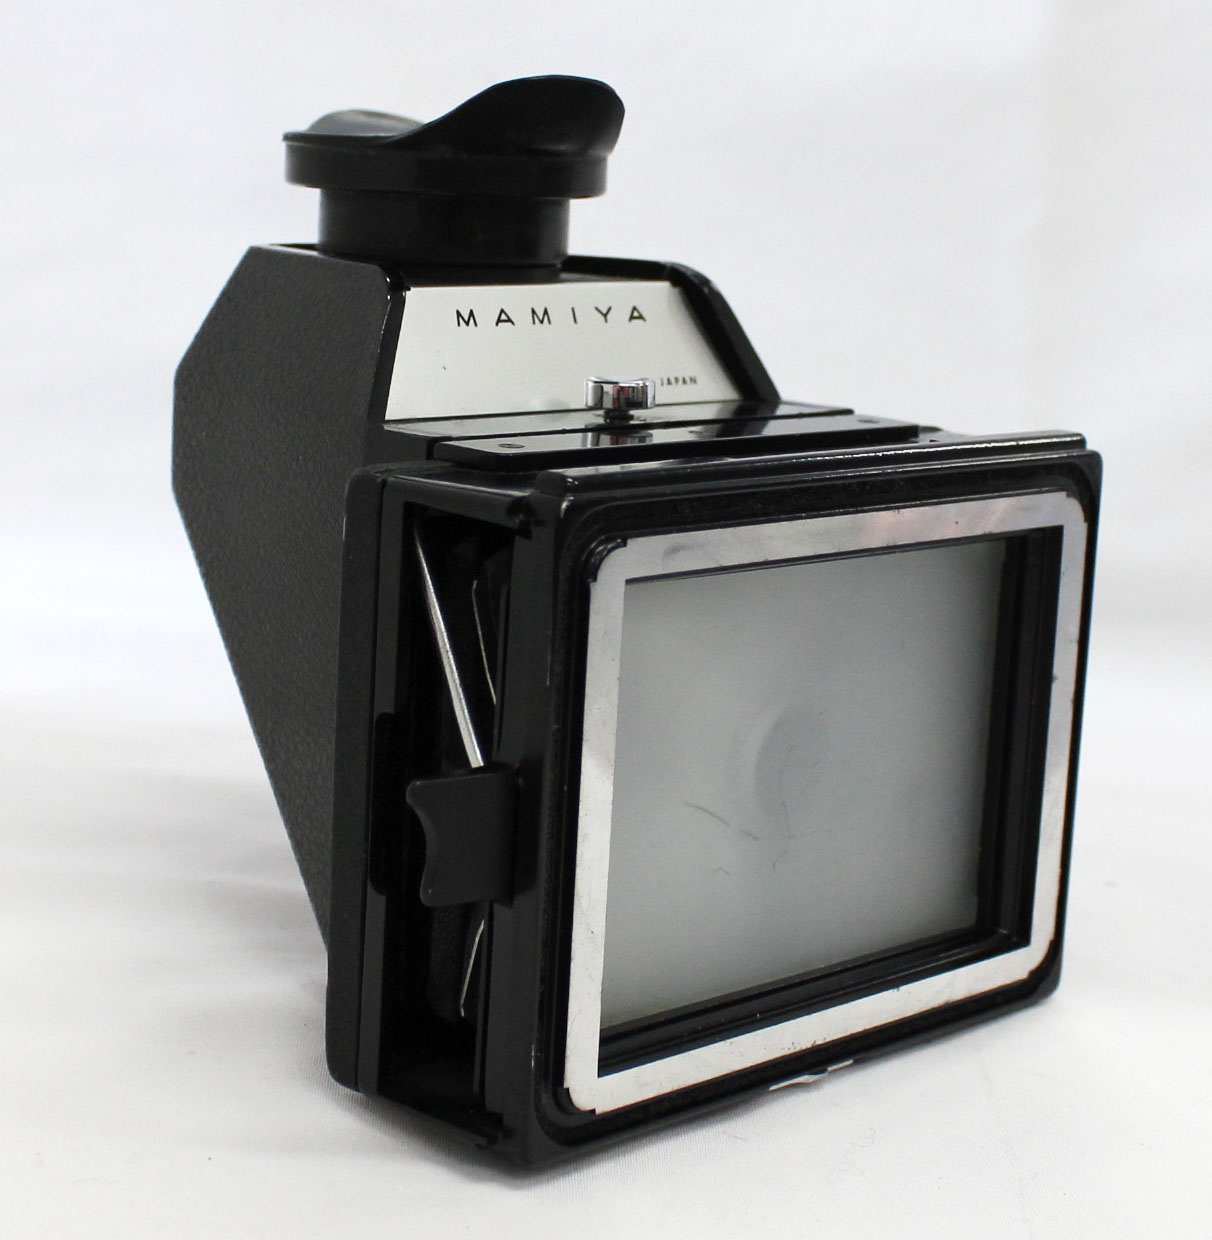 Mamiya Right Angle Focusing Back Finder for Universal Press Super 23 from Japan Photo 1